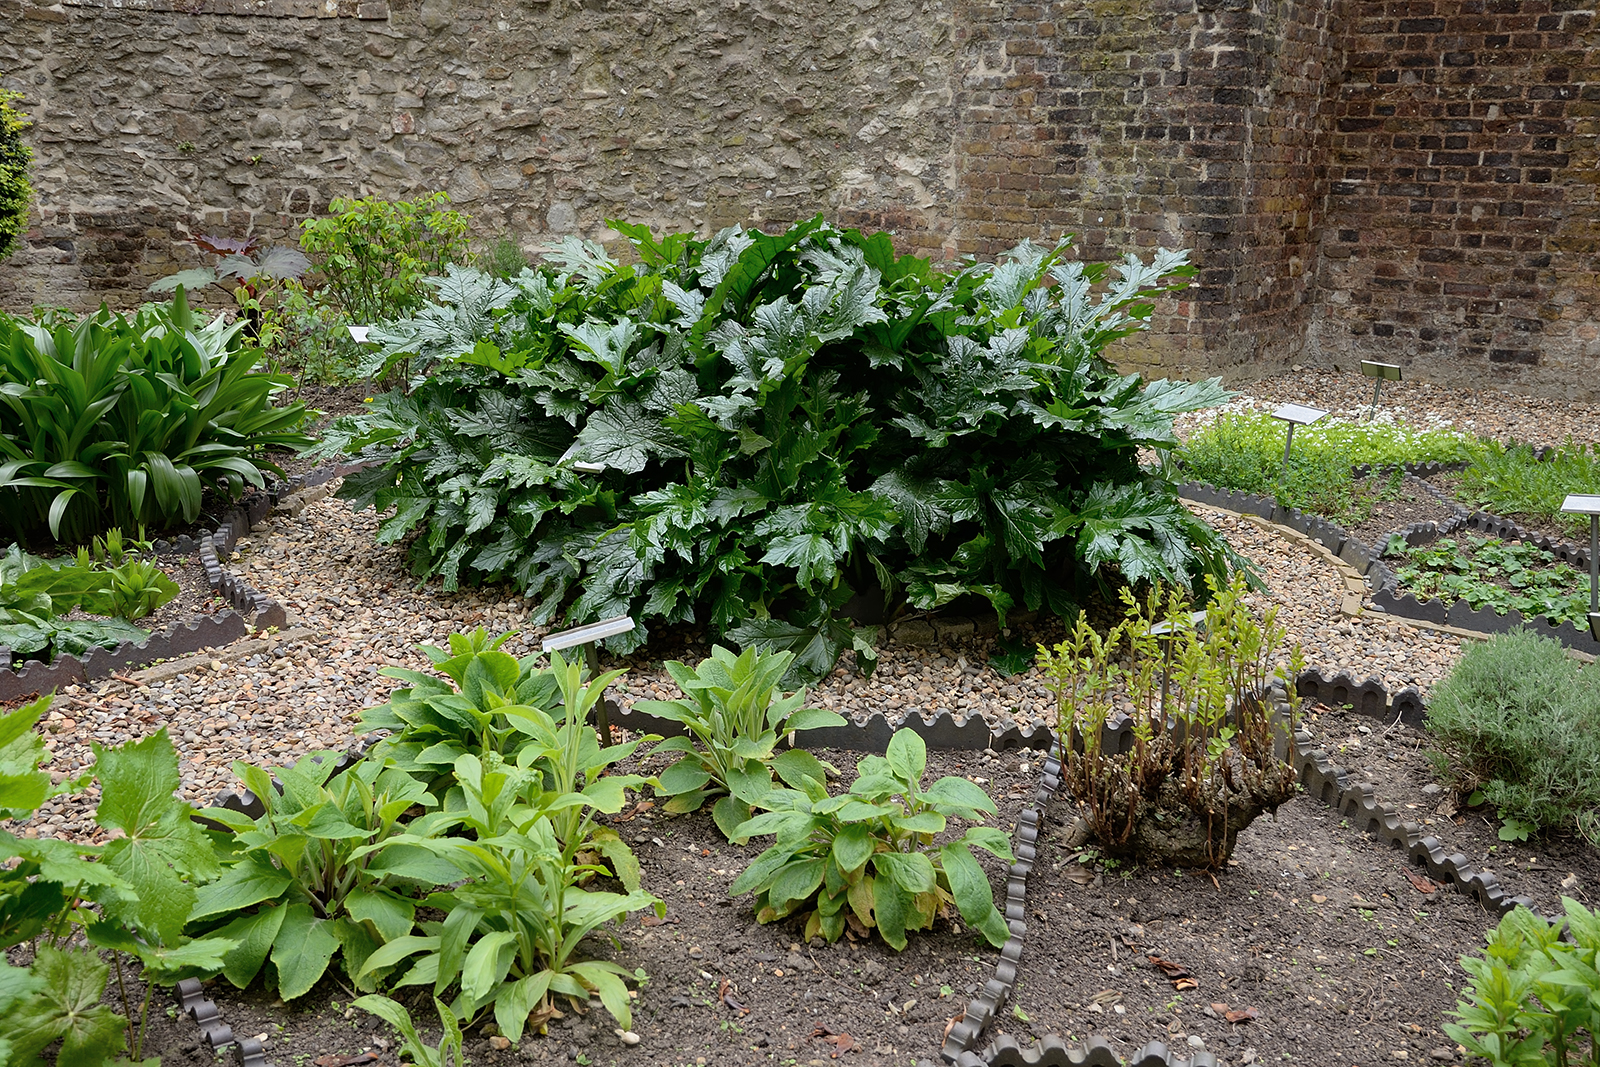 20170416_City-of-London_Monkwell-Square_Medicinal-plants-in-Barber-Surgeons-garden